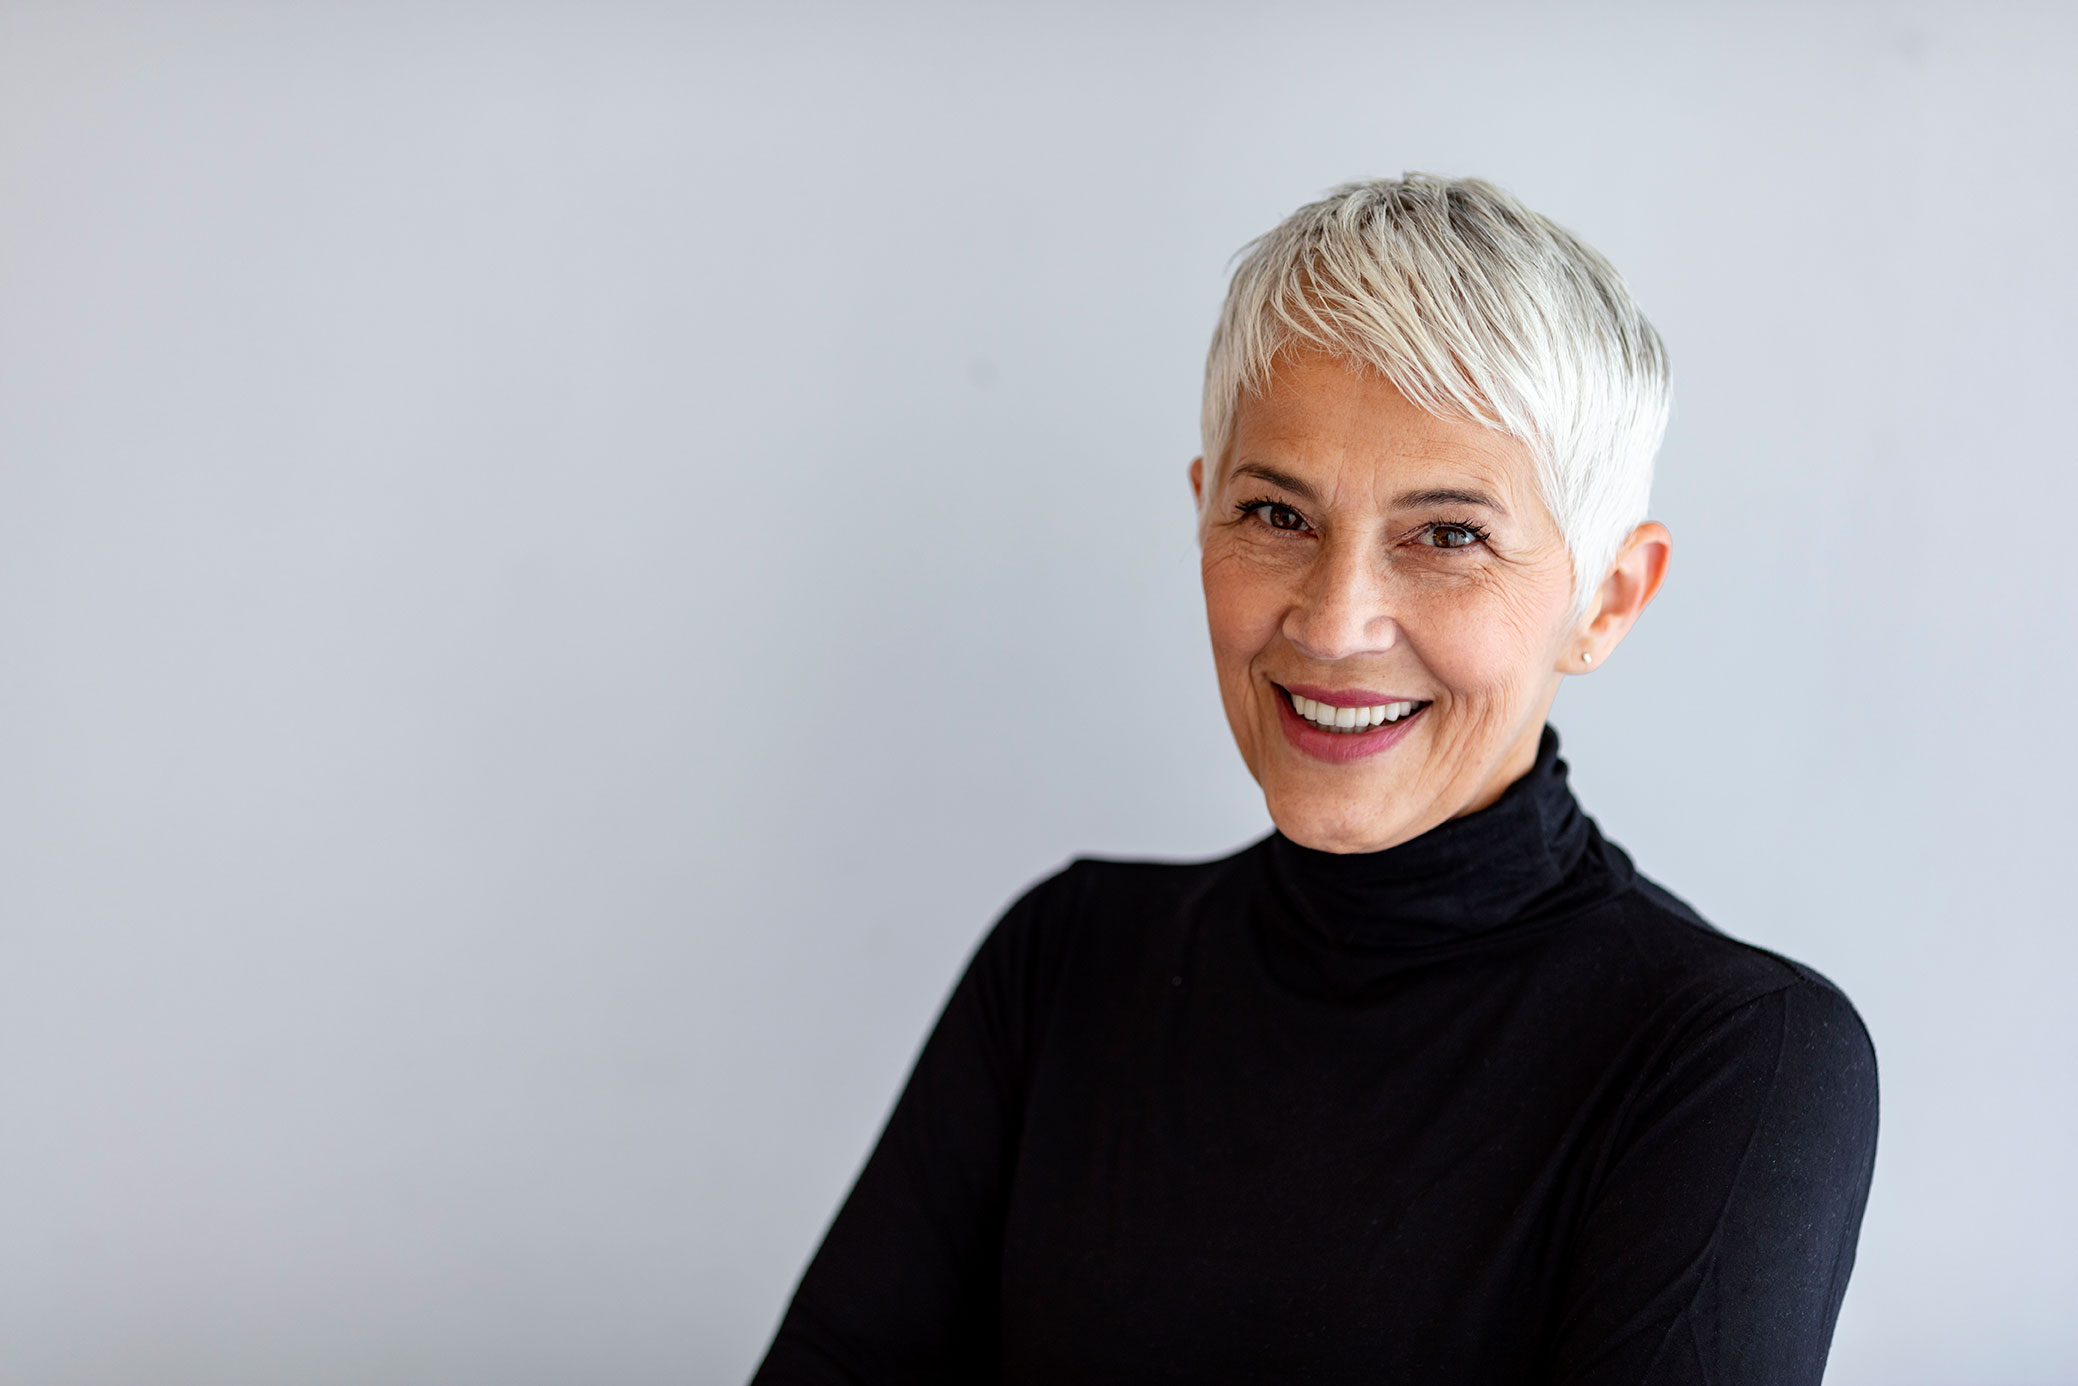 Close up portrait of beautiful older gray hair woman smiling and standing by gray wall wearing black turtleneck.